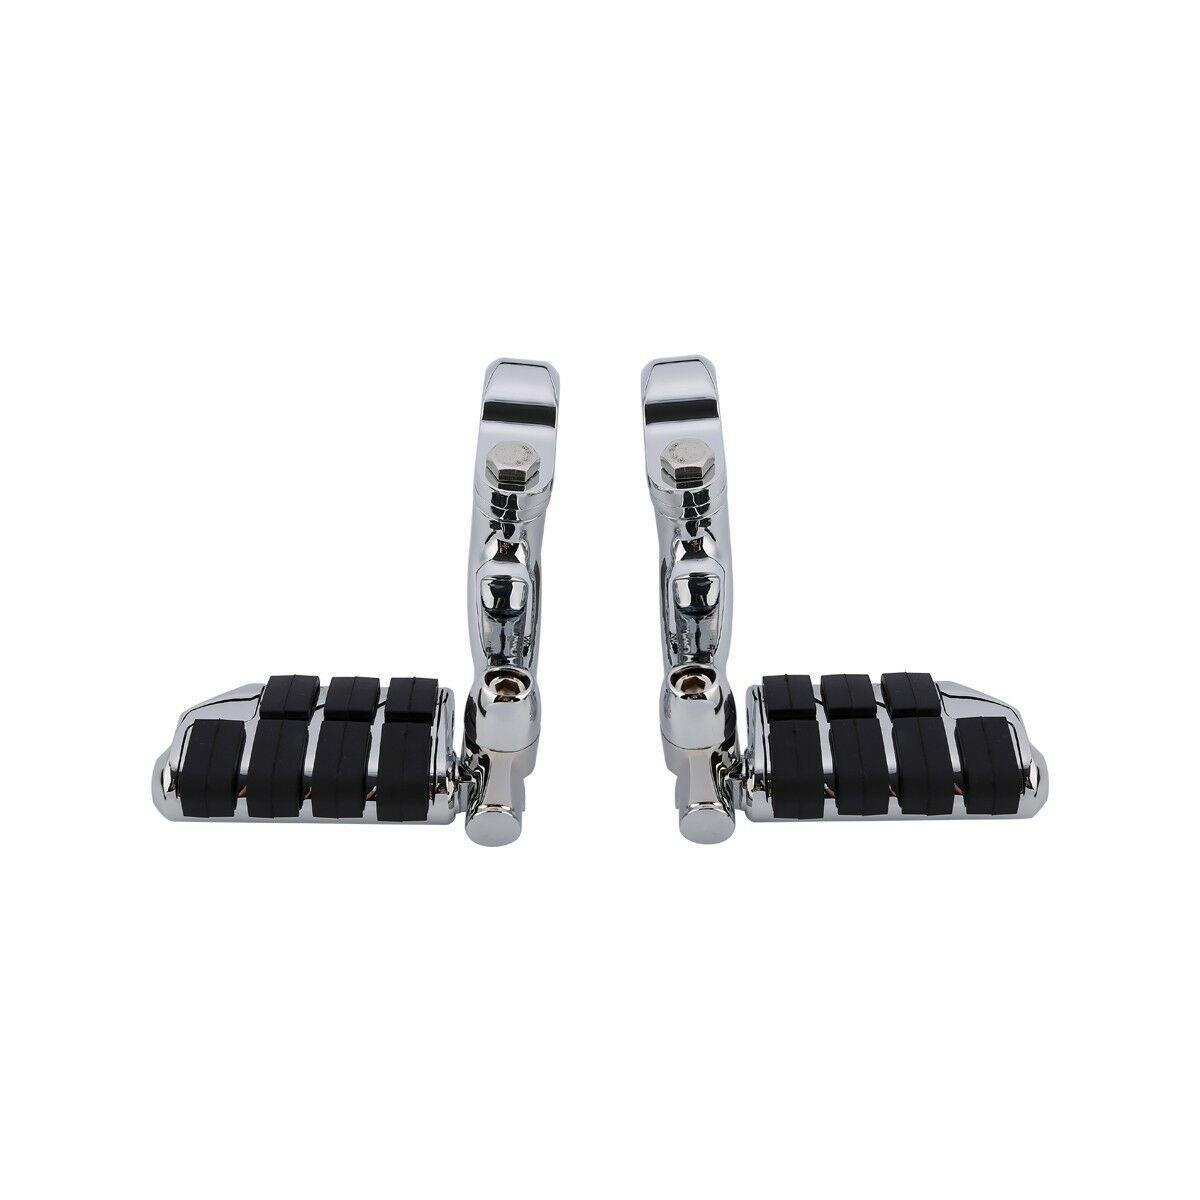 1-1/4" Long Angled Highway Foot Pegs Footrests Chrome Fit For Harley Road Glide - Moto Life Products